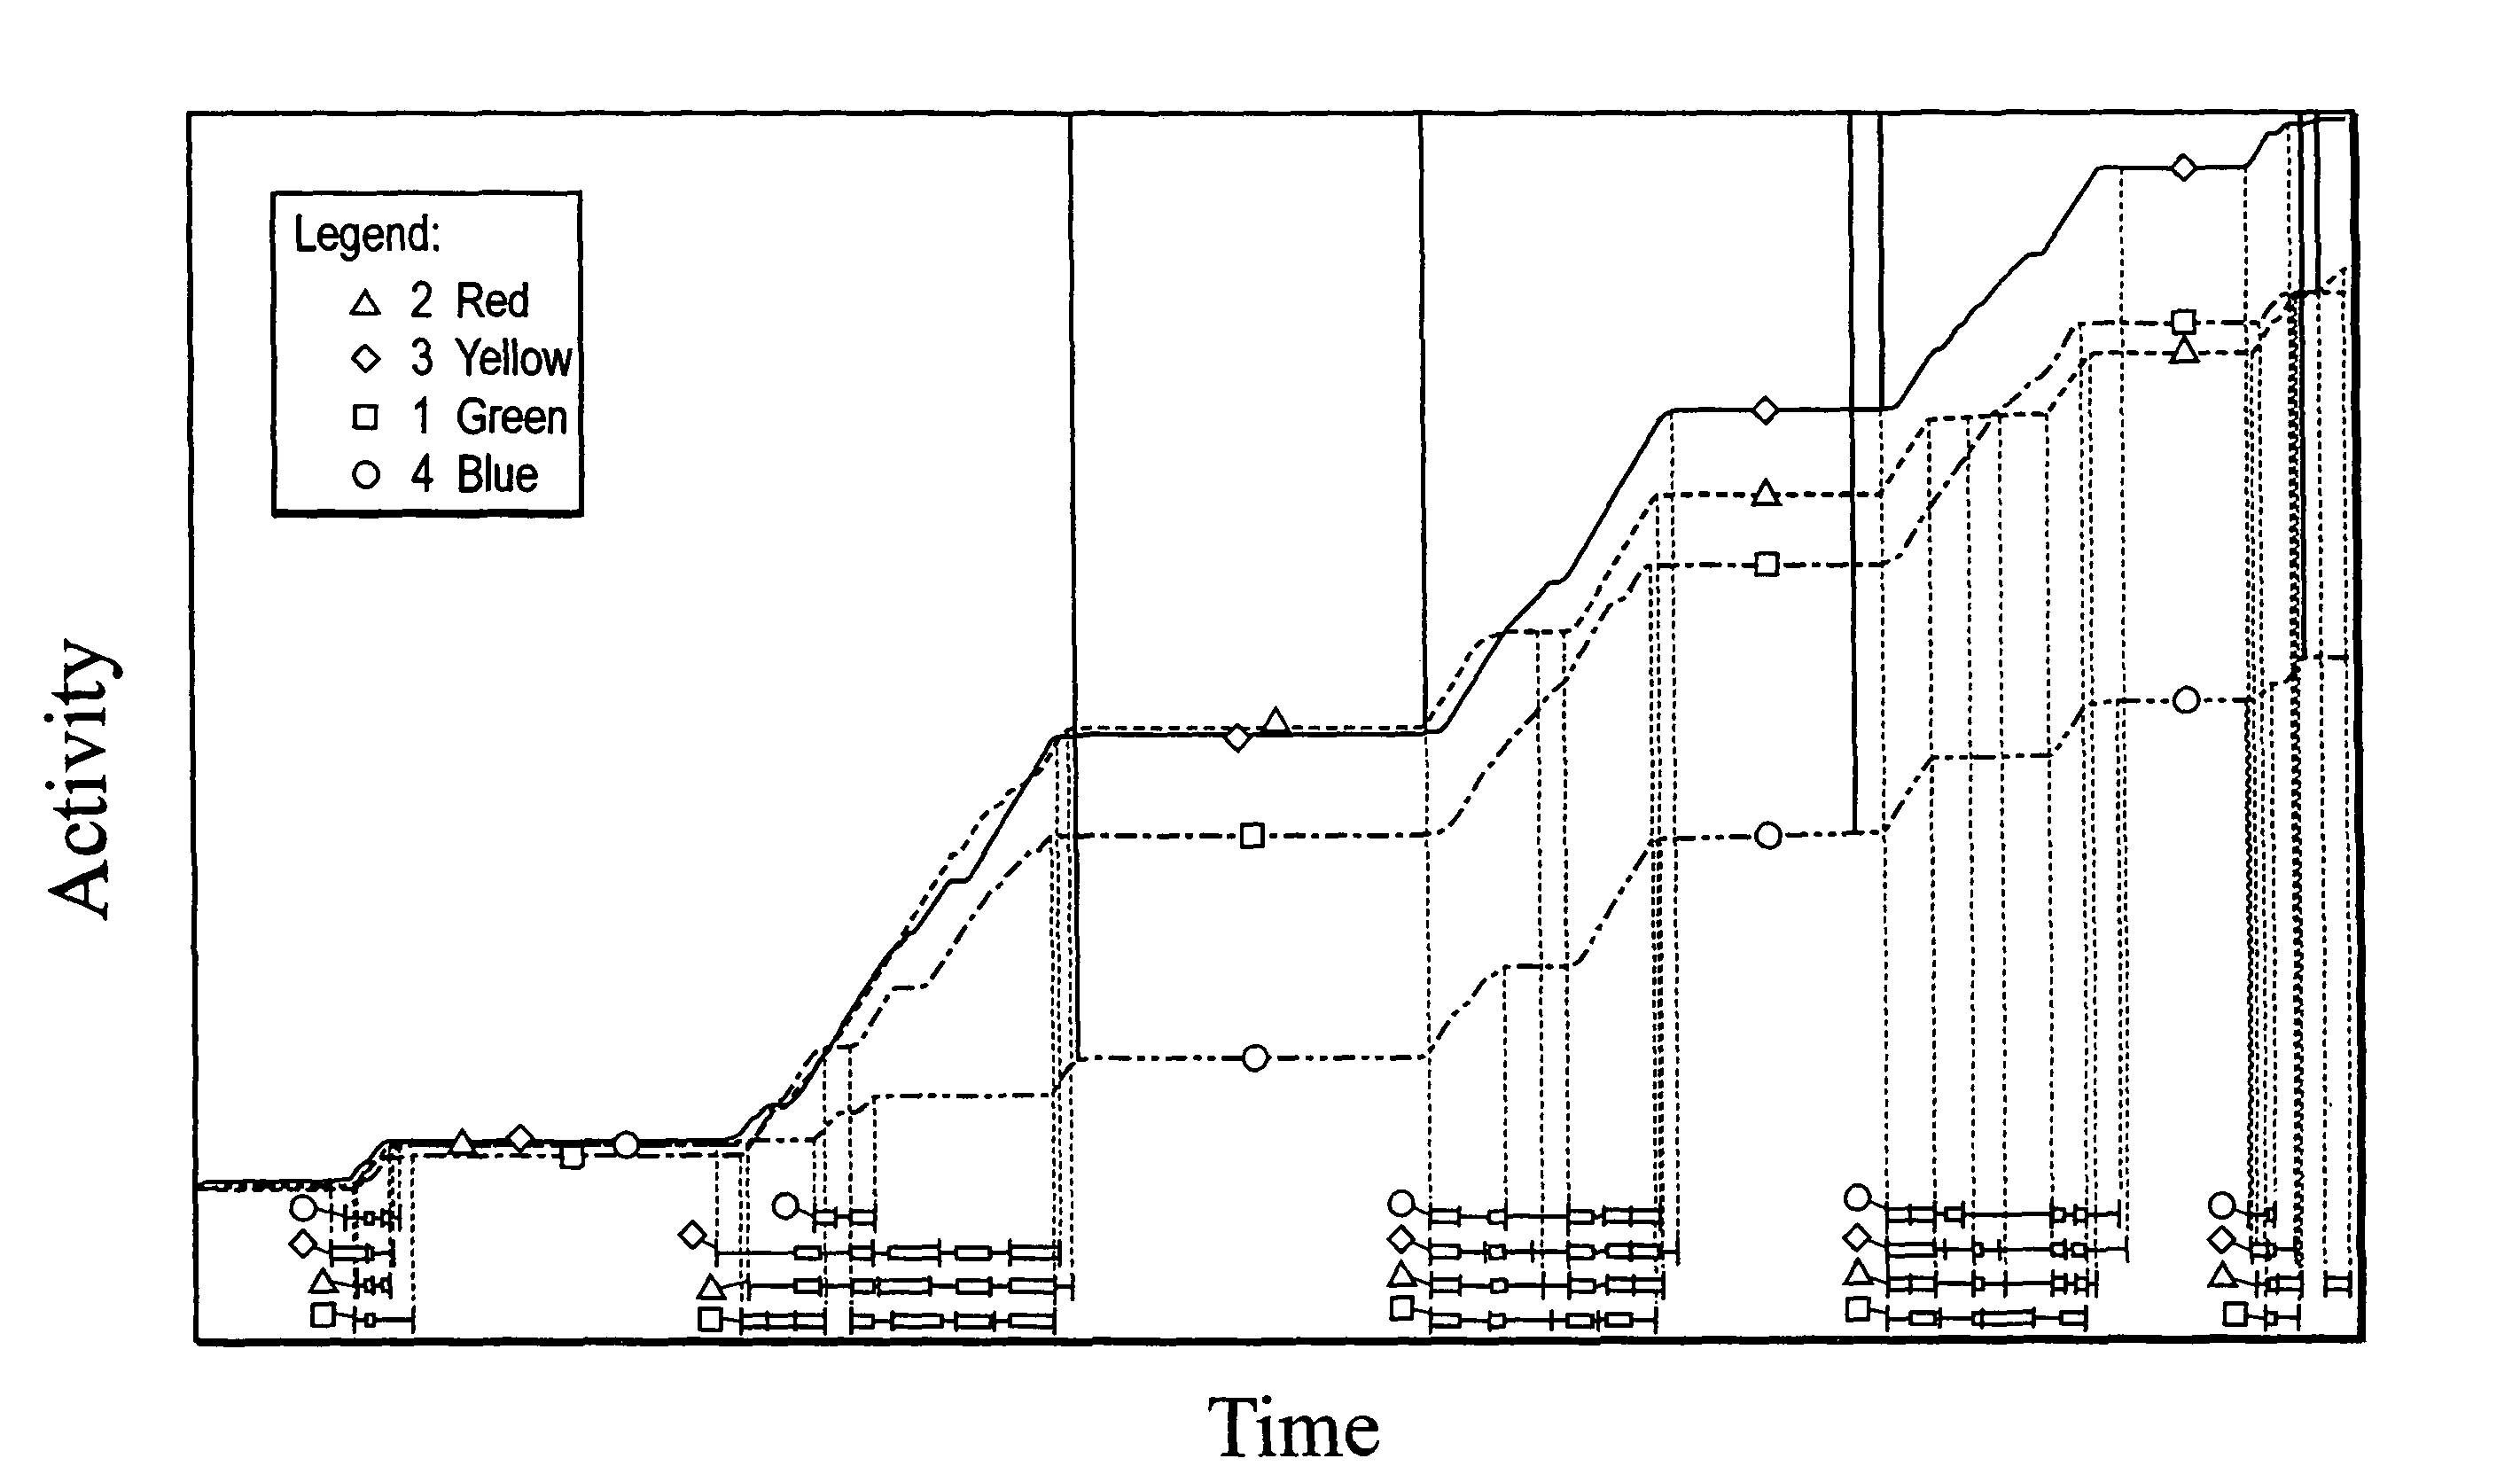 Method and system for analyzing fixed-camera video via the selection, visualization, and interaction with storyboard keyframes